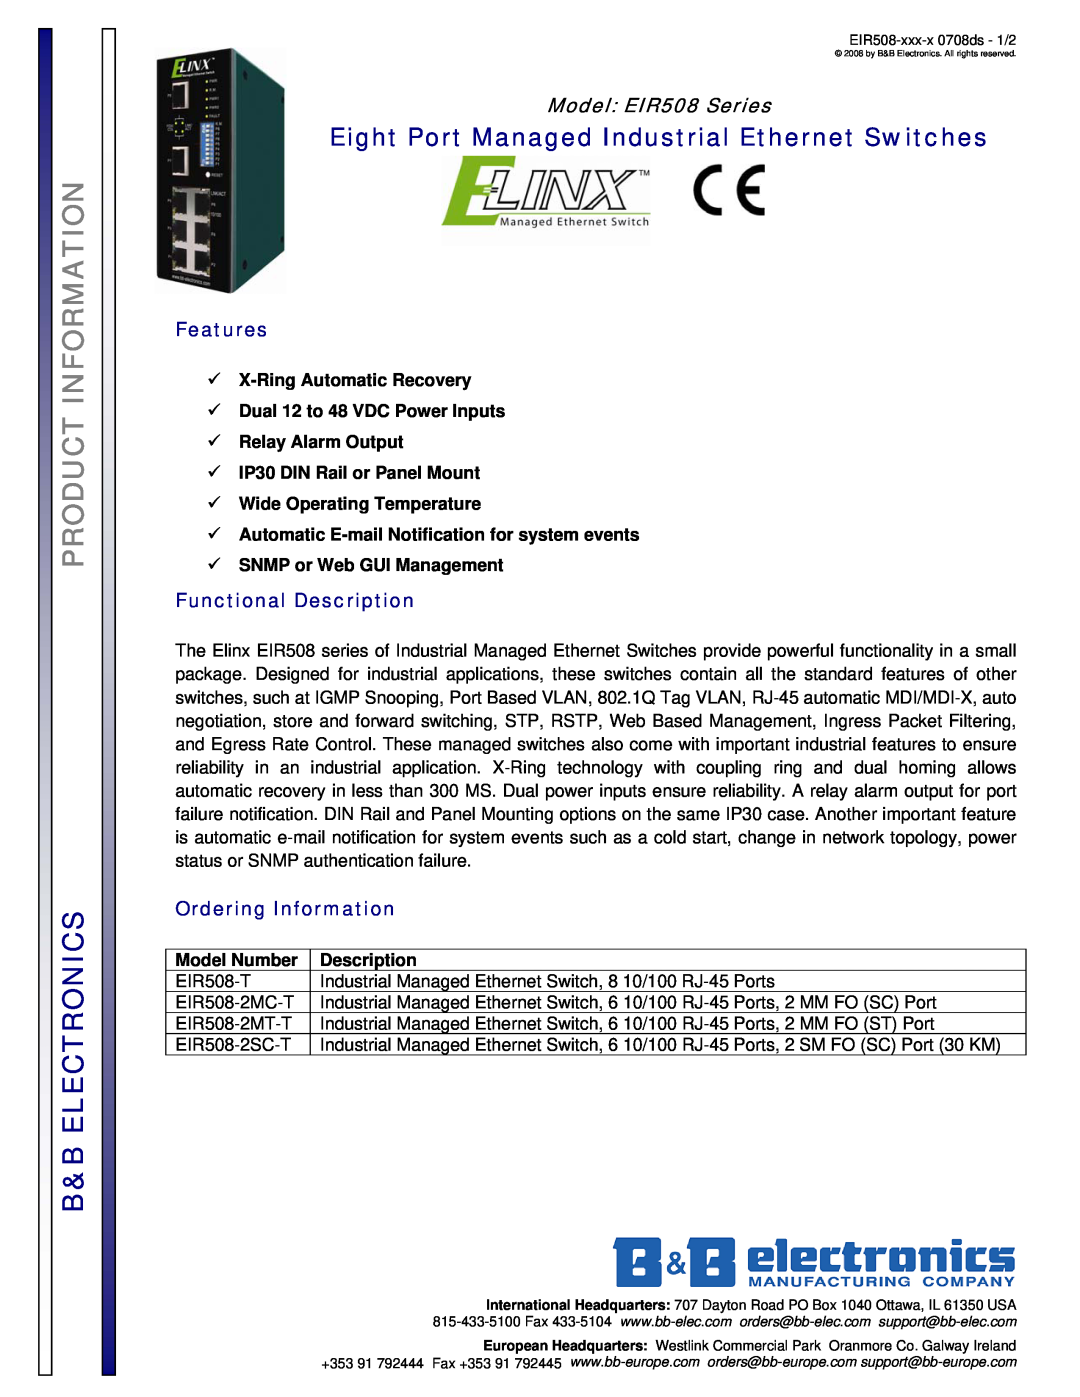 B&B Electronics EIR508-2SC-T manual Product Information, B&B Electronics, Features, Functional Description, Model Number 